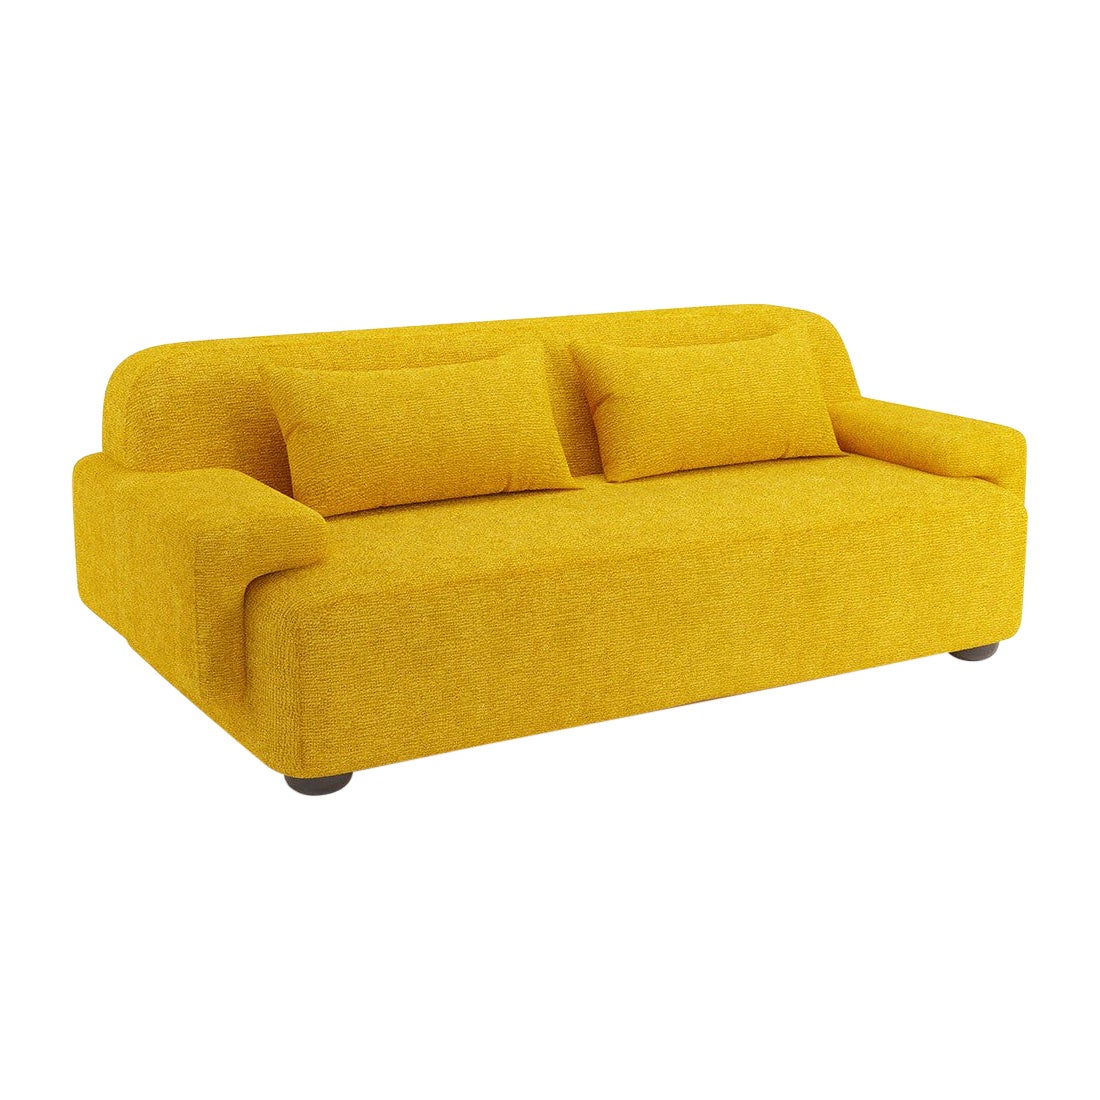 Popus Editions Lena 3 Seater Sofa in Corn Megeve Fabric with Knit Effect For Sale